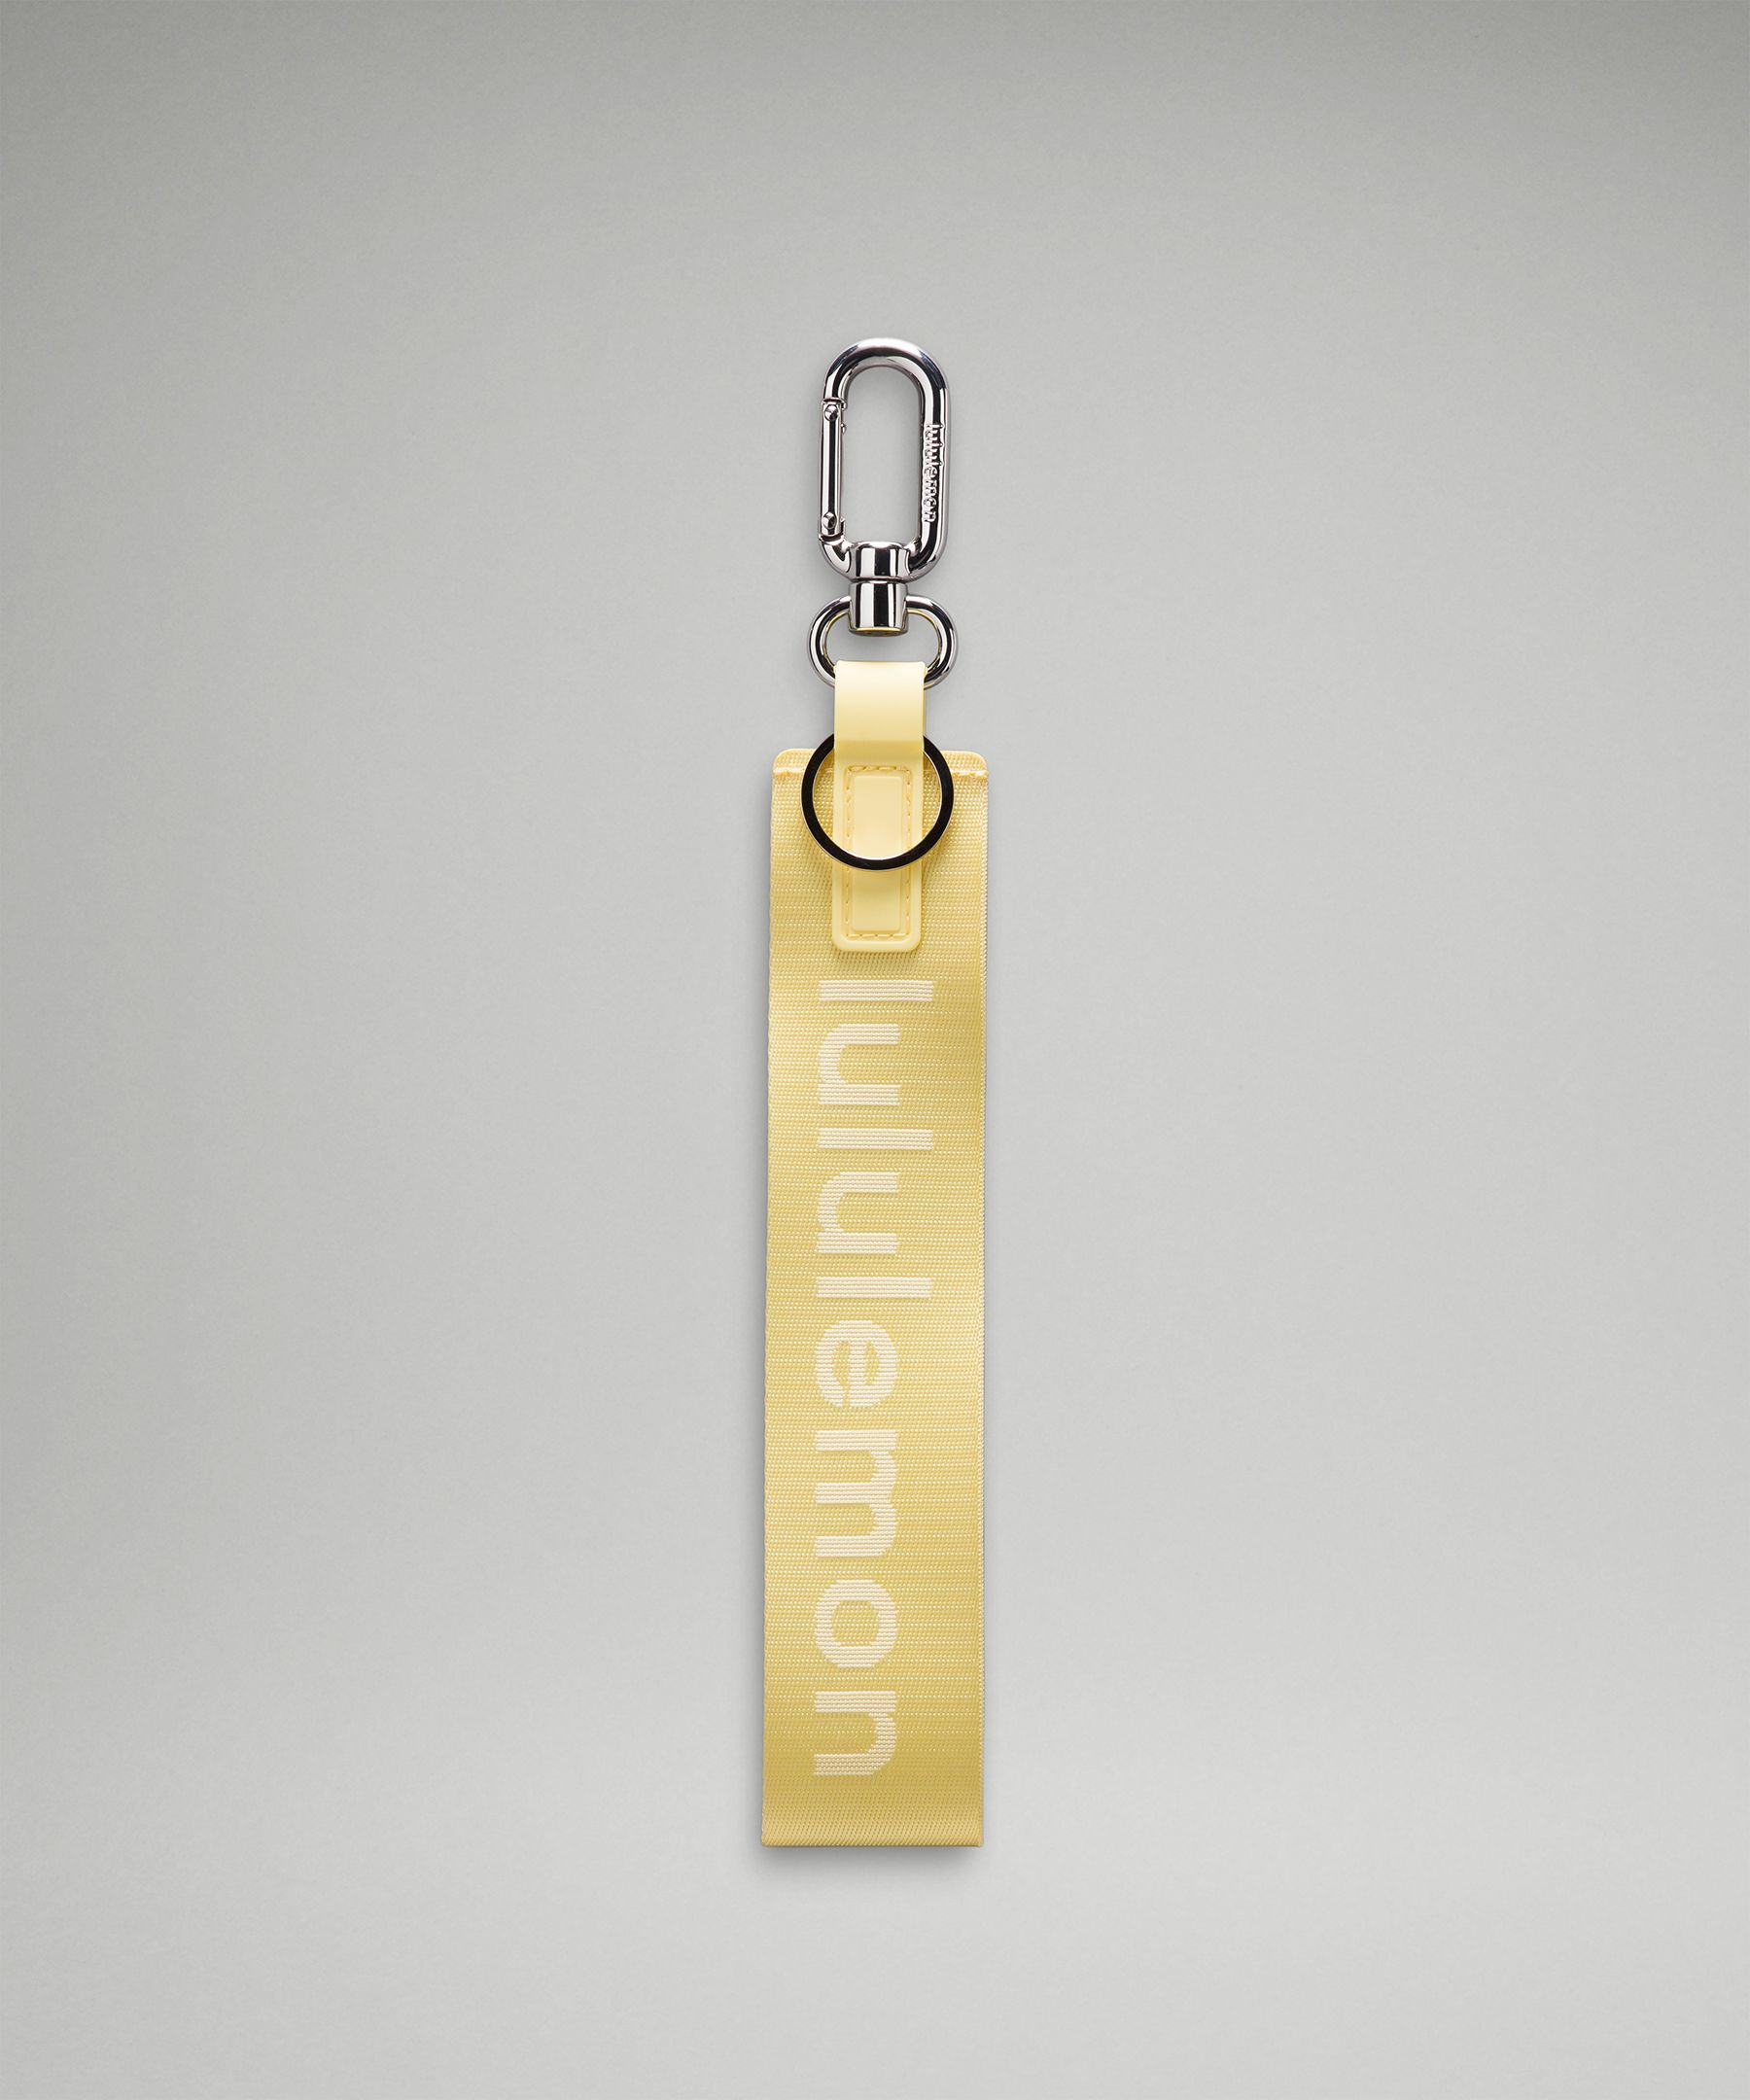 Lululemon Never Lost Keychain In Yellow